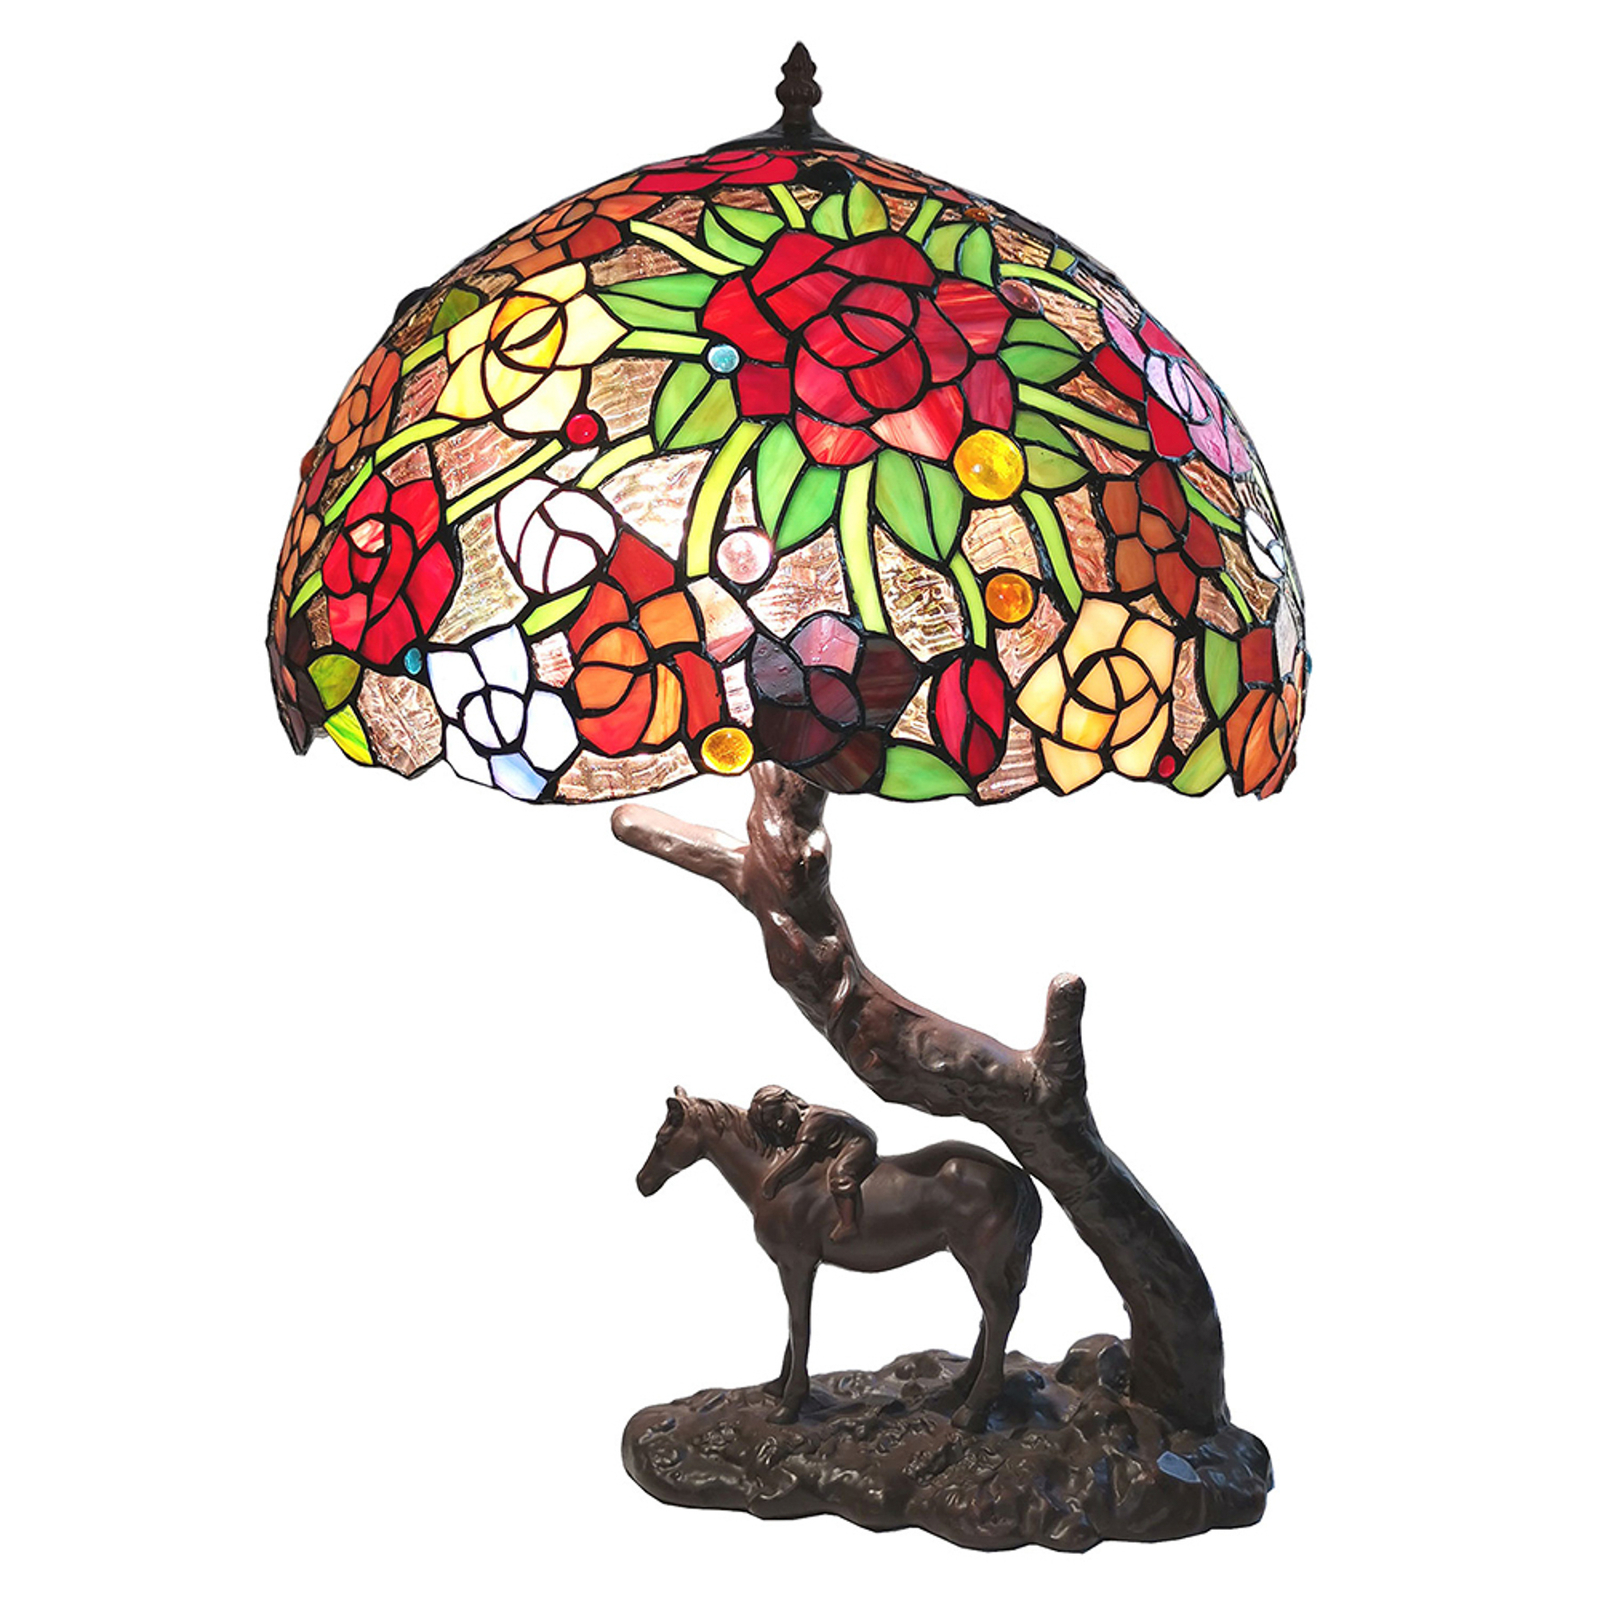 Lampe à poser 5LL-6061 style Tiffany, rouge/verte